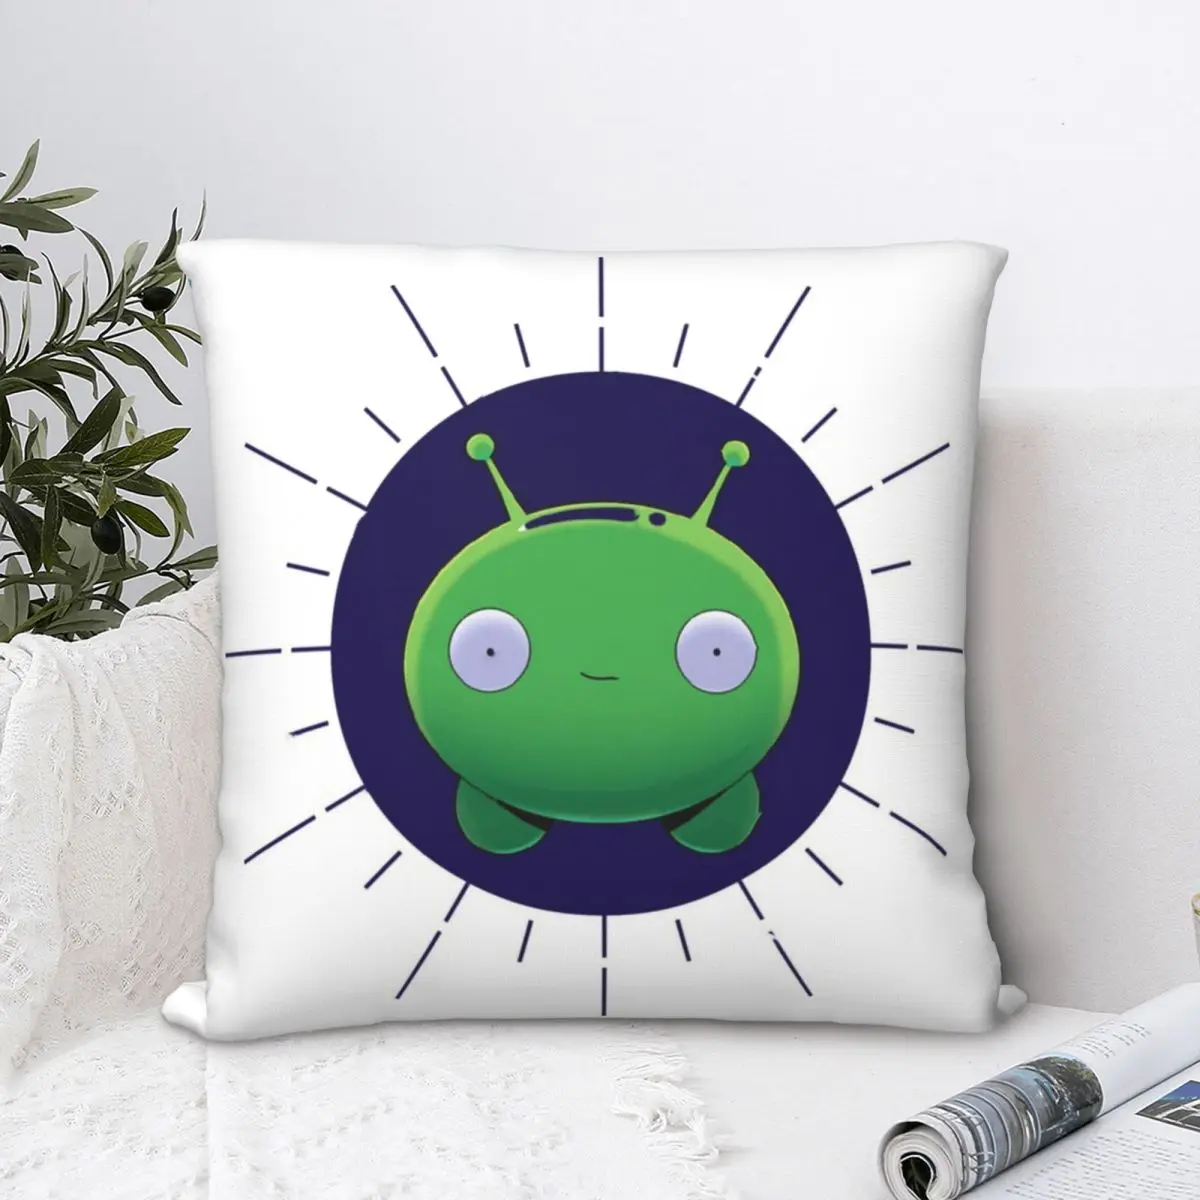 

MOONCAKE FUNNY DESIGN Square Pillowcase Cushion Cover funny Home Decorative Pillow Case for Room Nordic 45*45cm